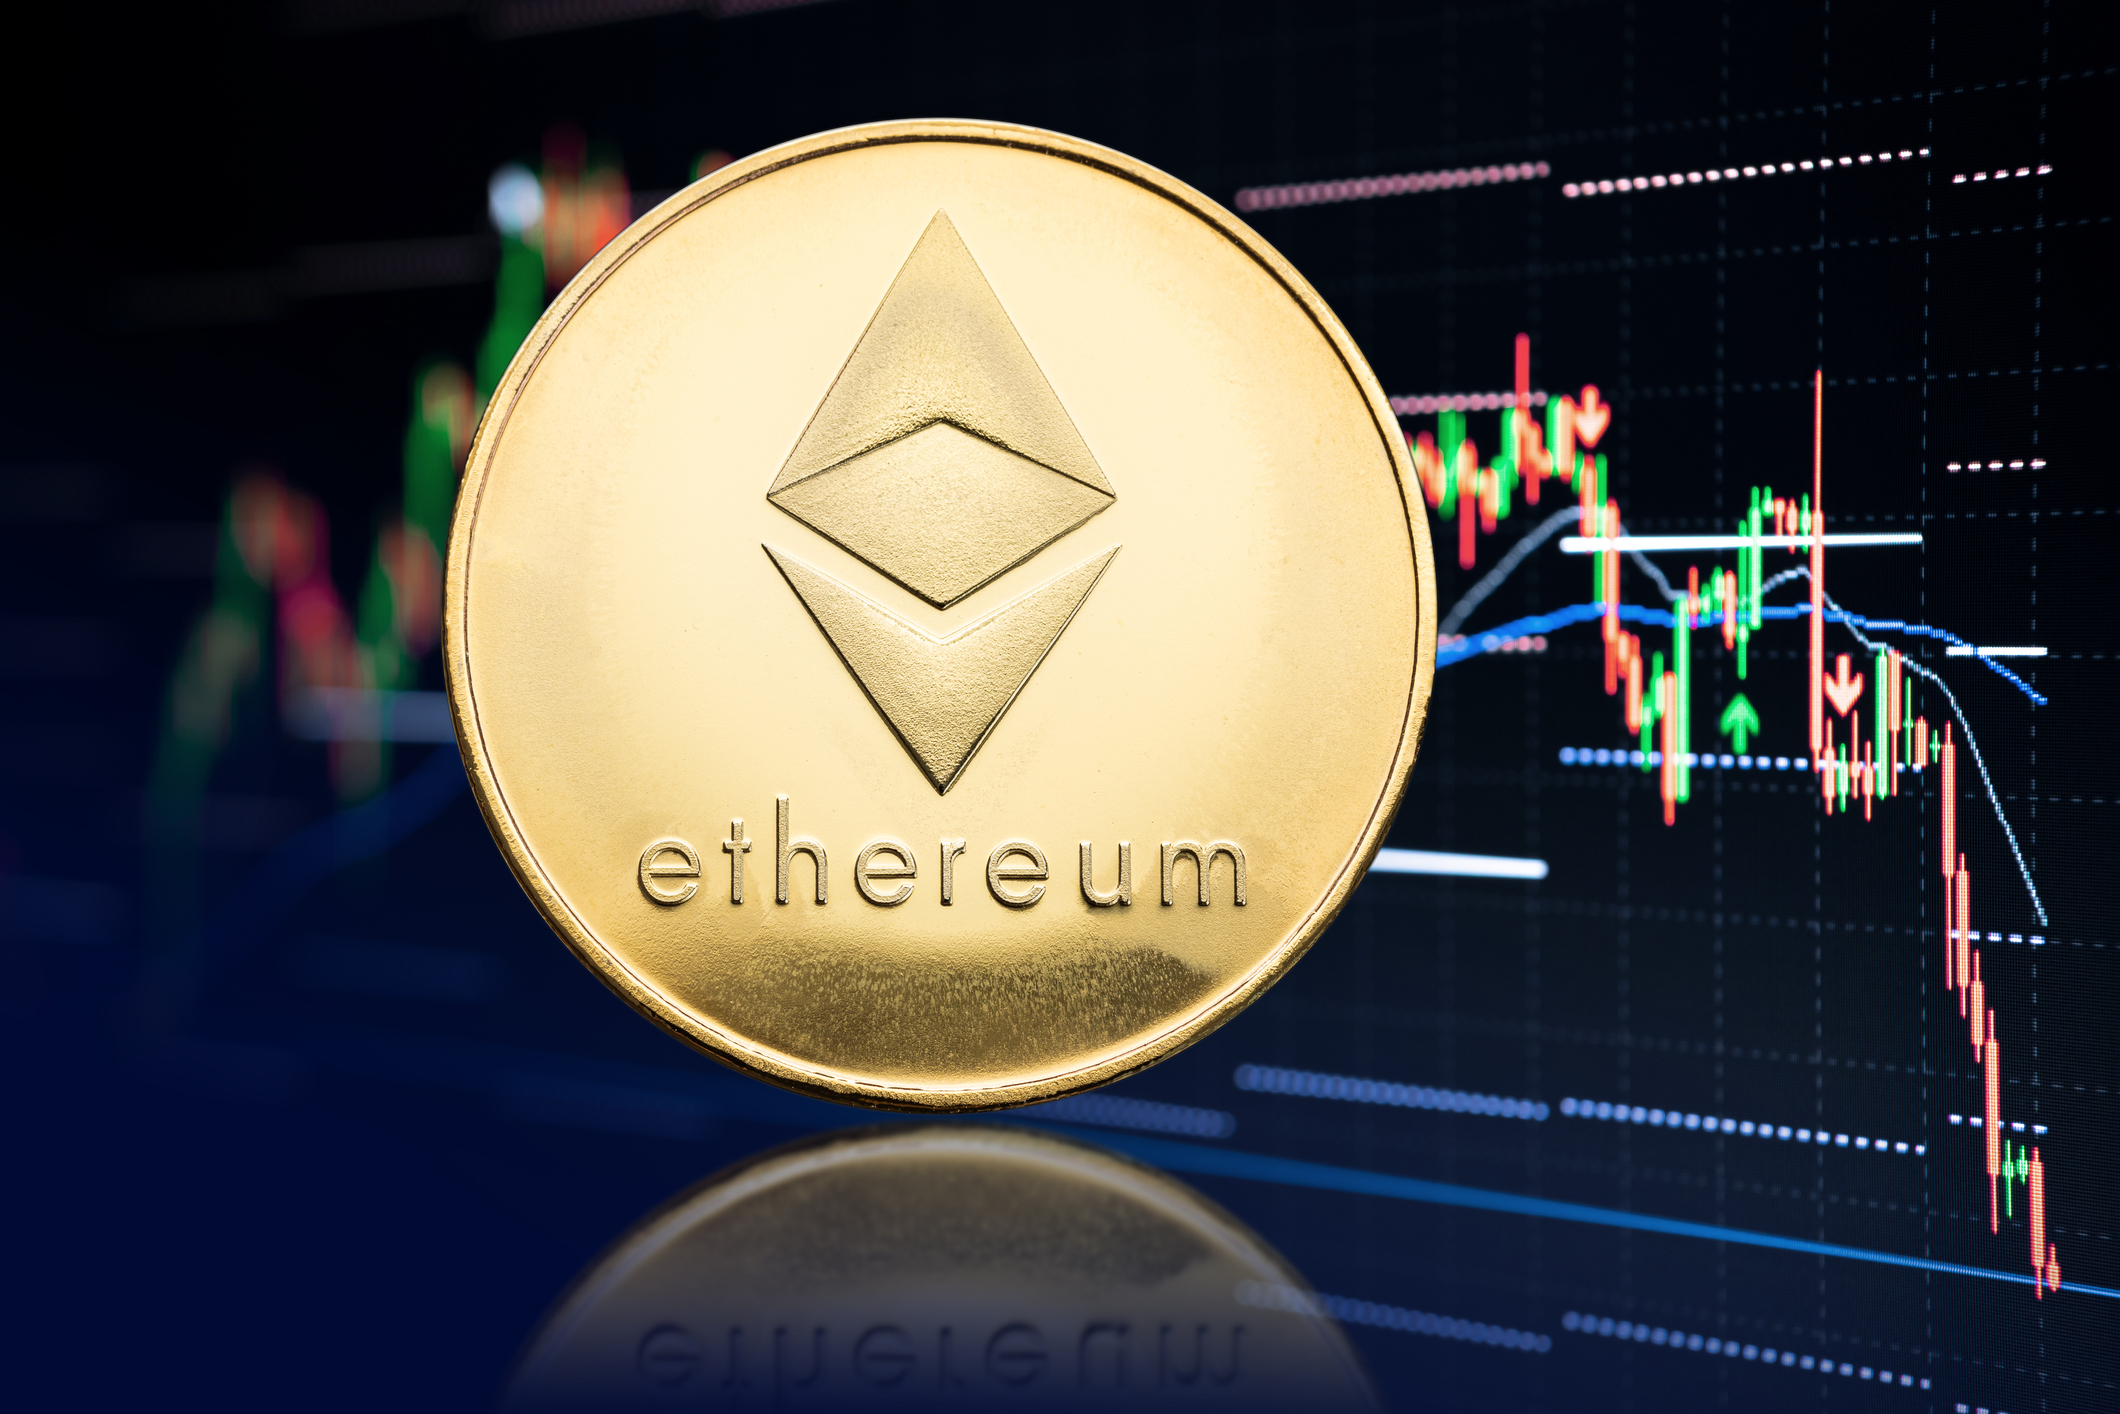 Ethereum Whale Transfers To Exchanges Suggest More Selling Pressure For ETH